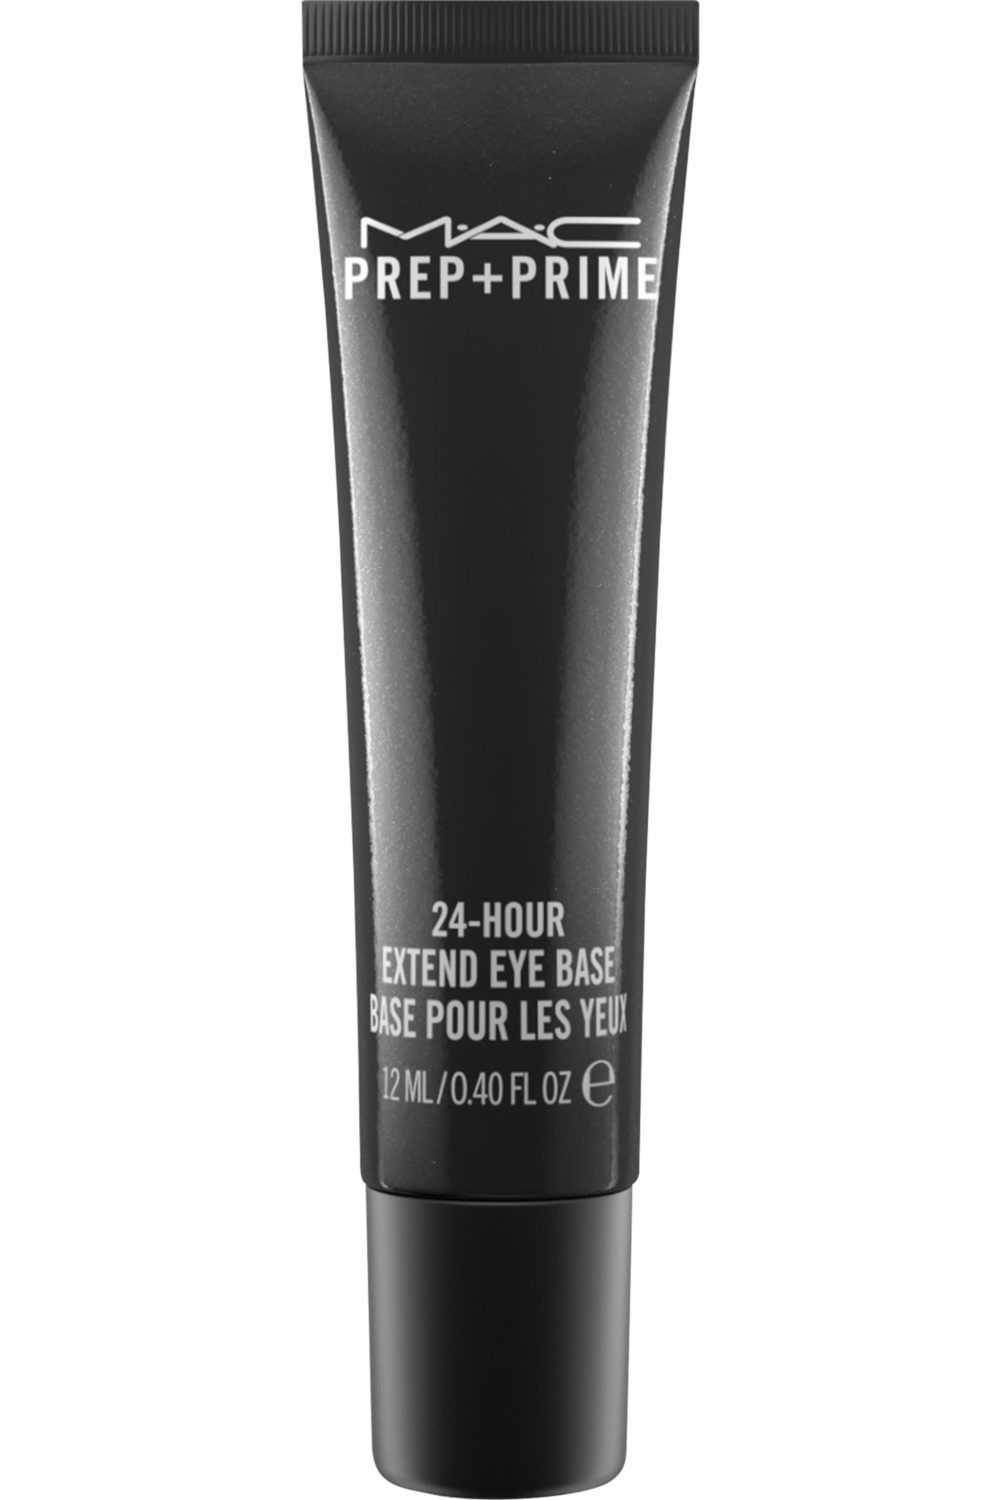 M.A.C - Base yeux Prep+Prime 24-heures 12ml